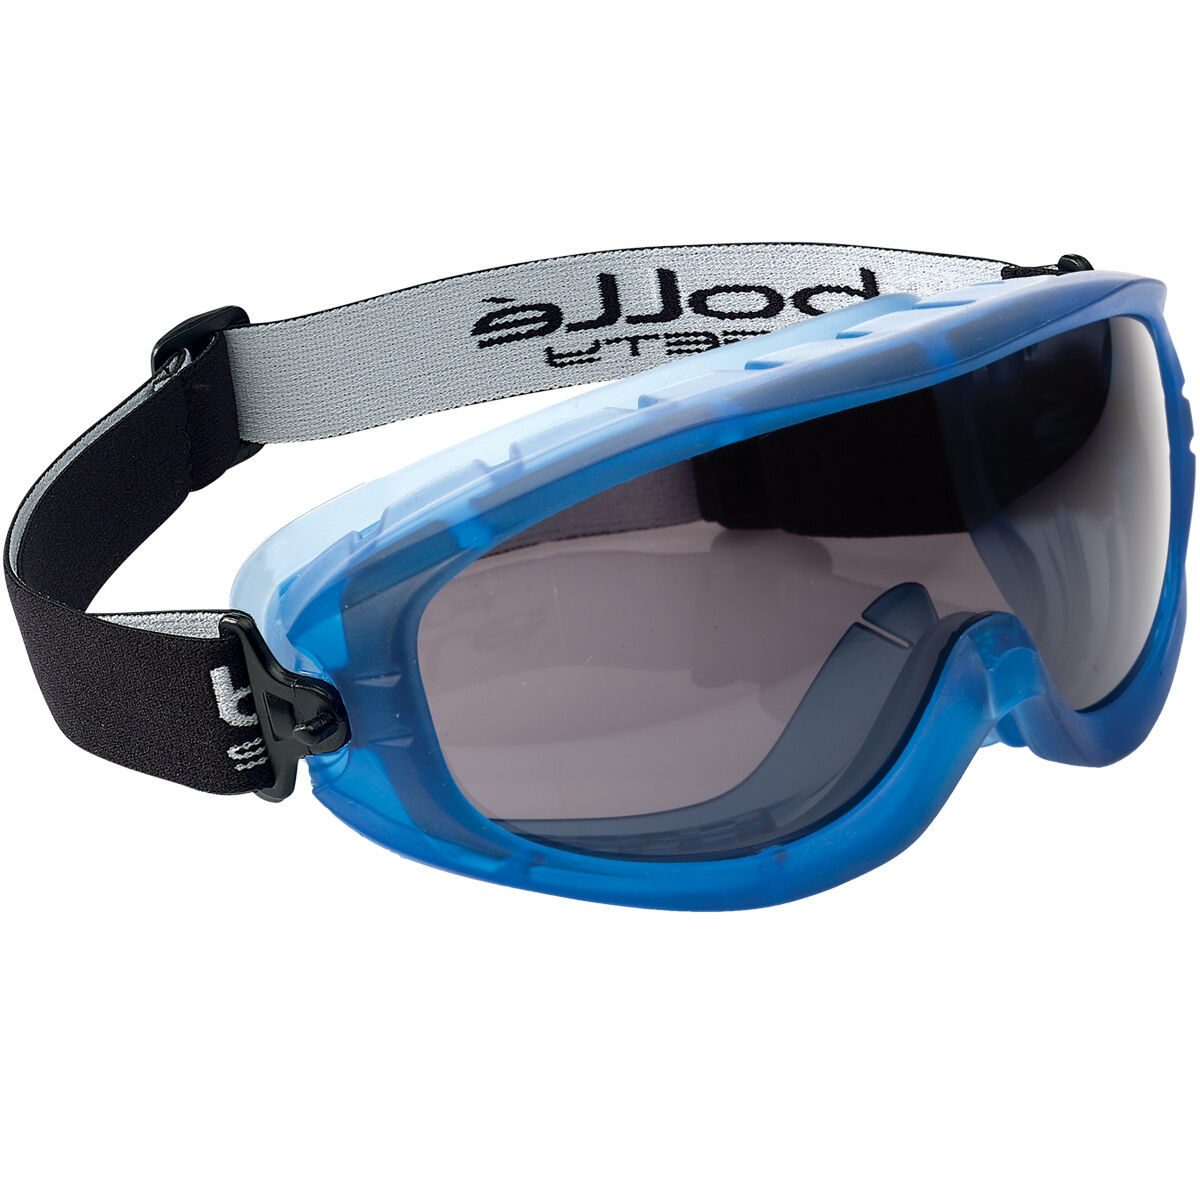 BOLLE ATOM PLATINUM SMOKE LENS INDIRECT VENTS SAFETY GOGGLES 